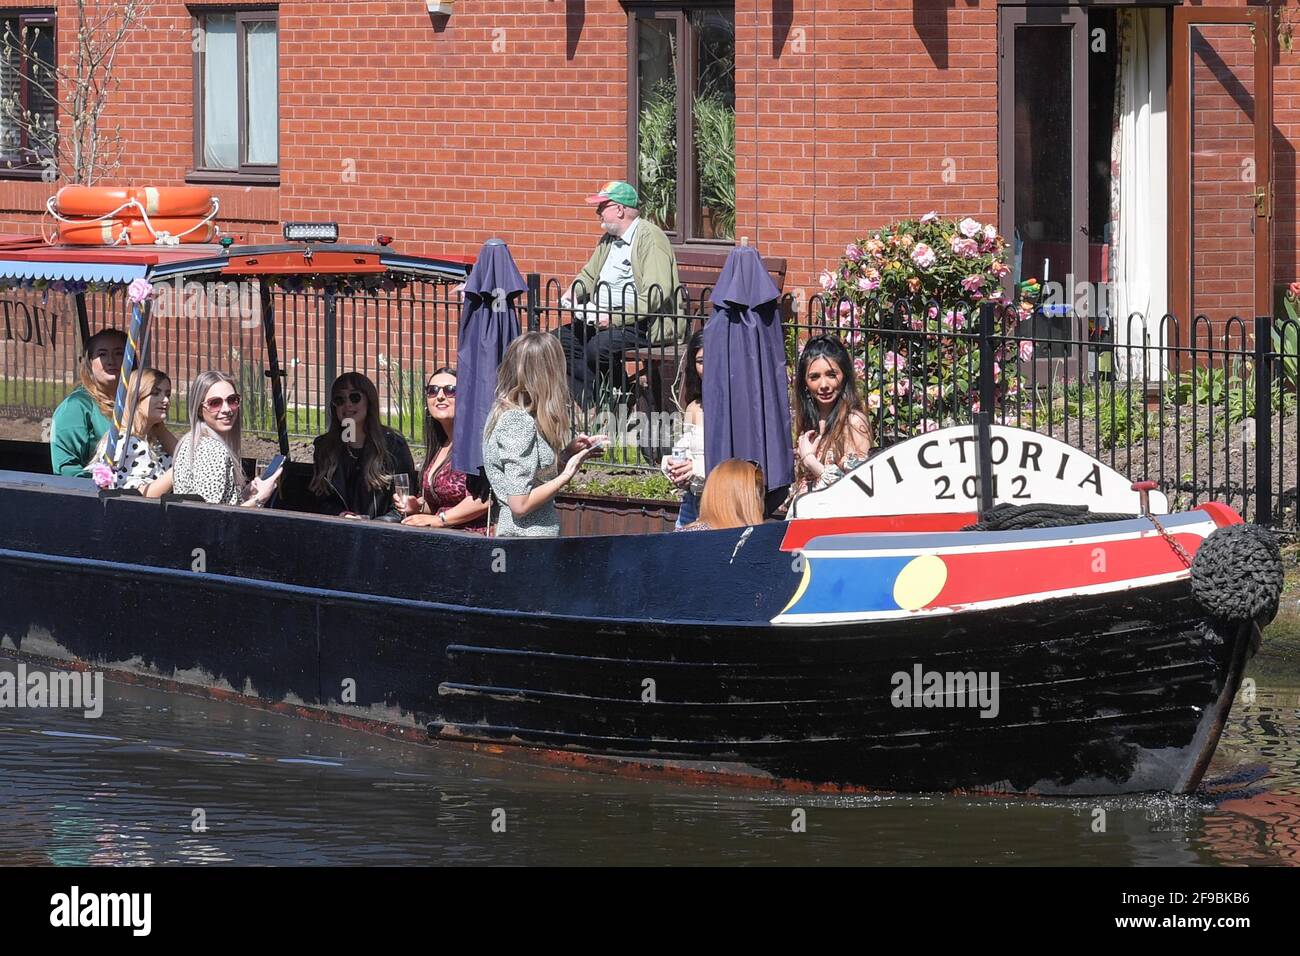 Birmingham city centre, UK. 17th Apr, 2021. A group of lady's enjoyed a canal boat trip in Birmingham city centre on 'Super Saturday'. Thousands of people came out despite the funeral of Prince Philip taking place today. Pubs and bars were full and streets were a sea of people. Pic by Credit: Ben Formby/Alamy Live News Stock Photo